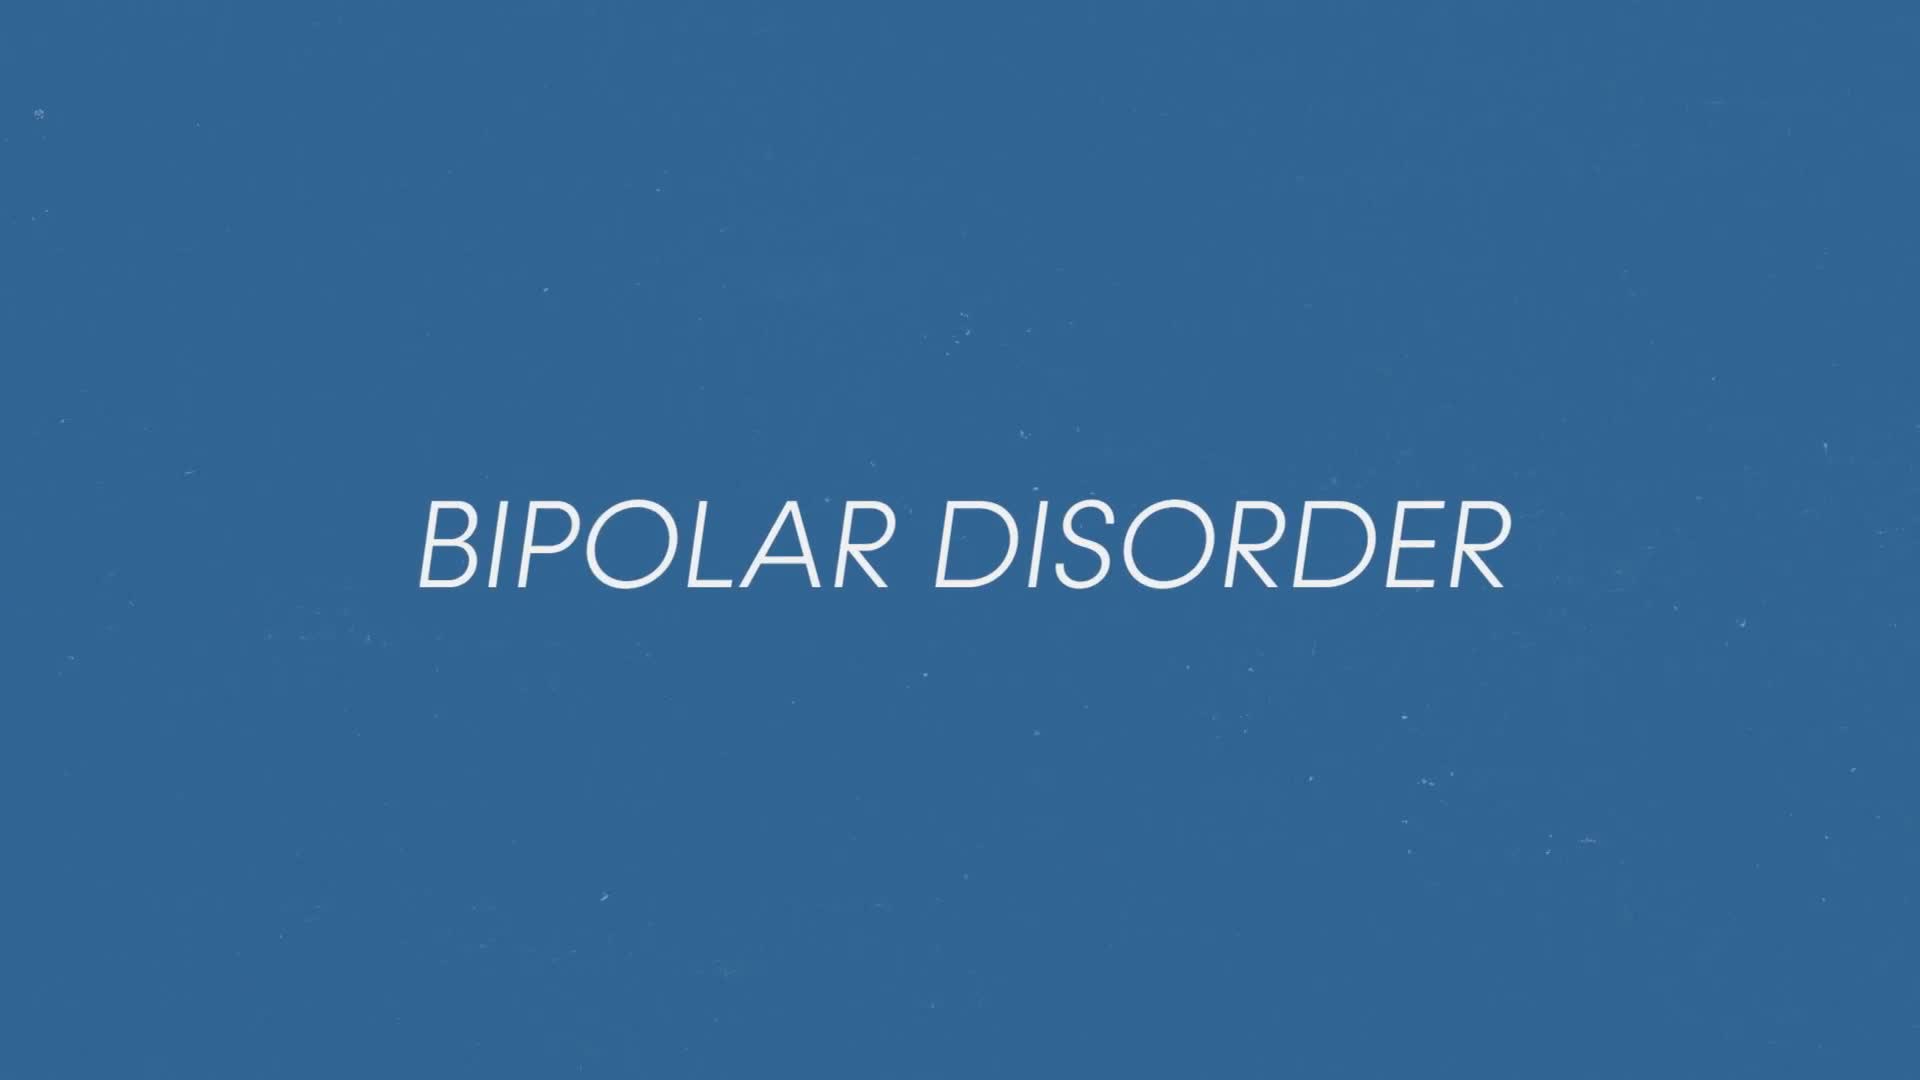 When You Don’t Want to Take Your Bipolar Medication — Battling Noncompliance